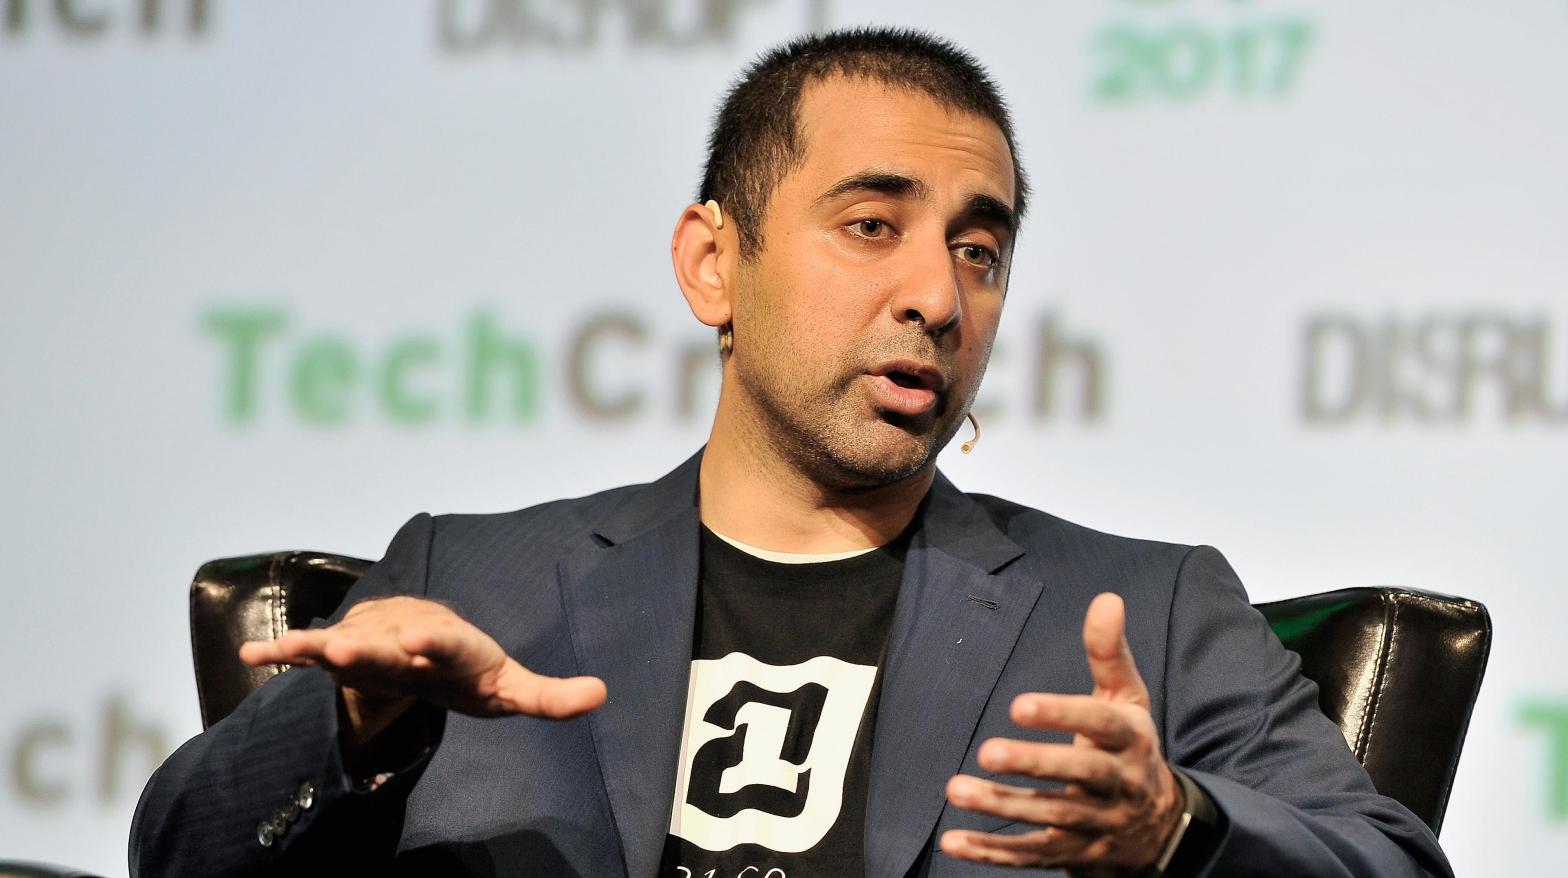 Balaji Srinivasan left Coinbase in 2019 but he remains a major bitcoin bull despite crypto prices' continued lull from 2021 highs. (Photo: Steve Jennings, Getty Images)